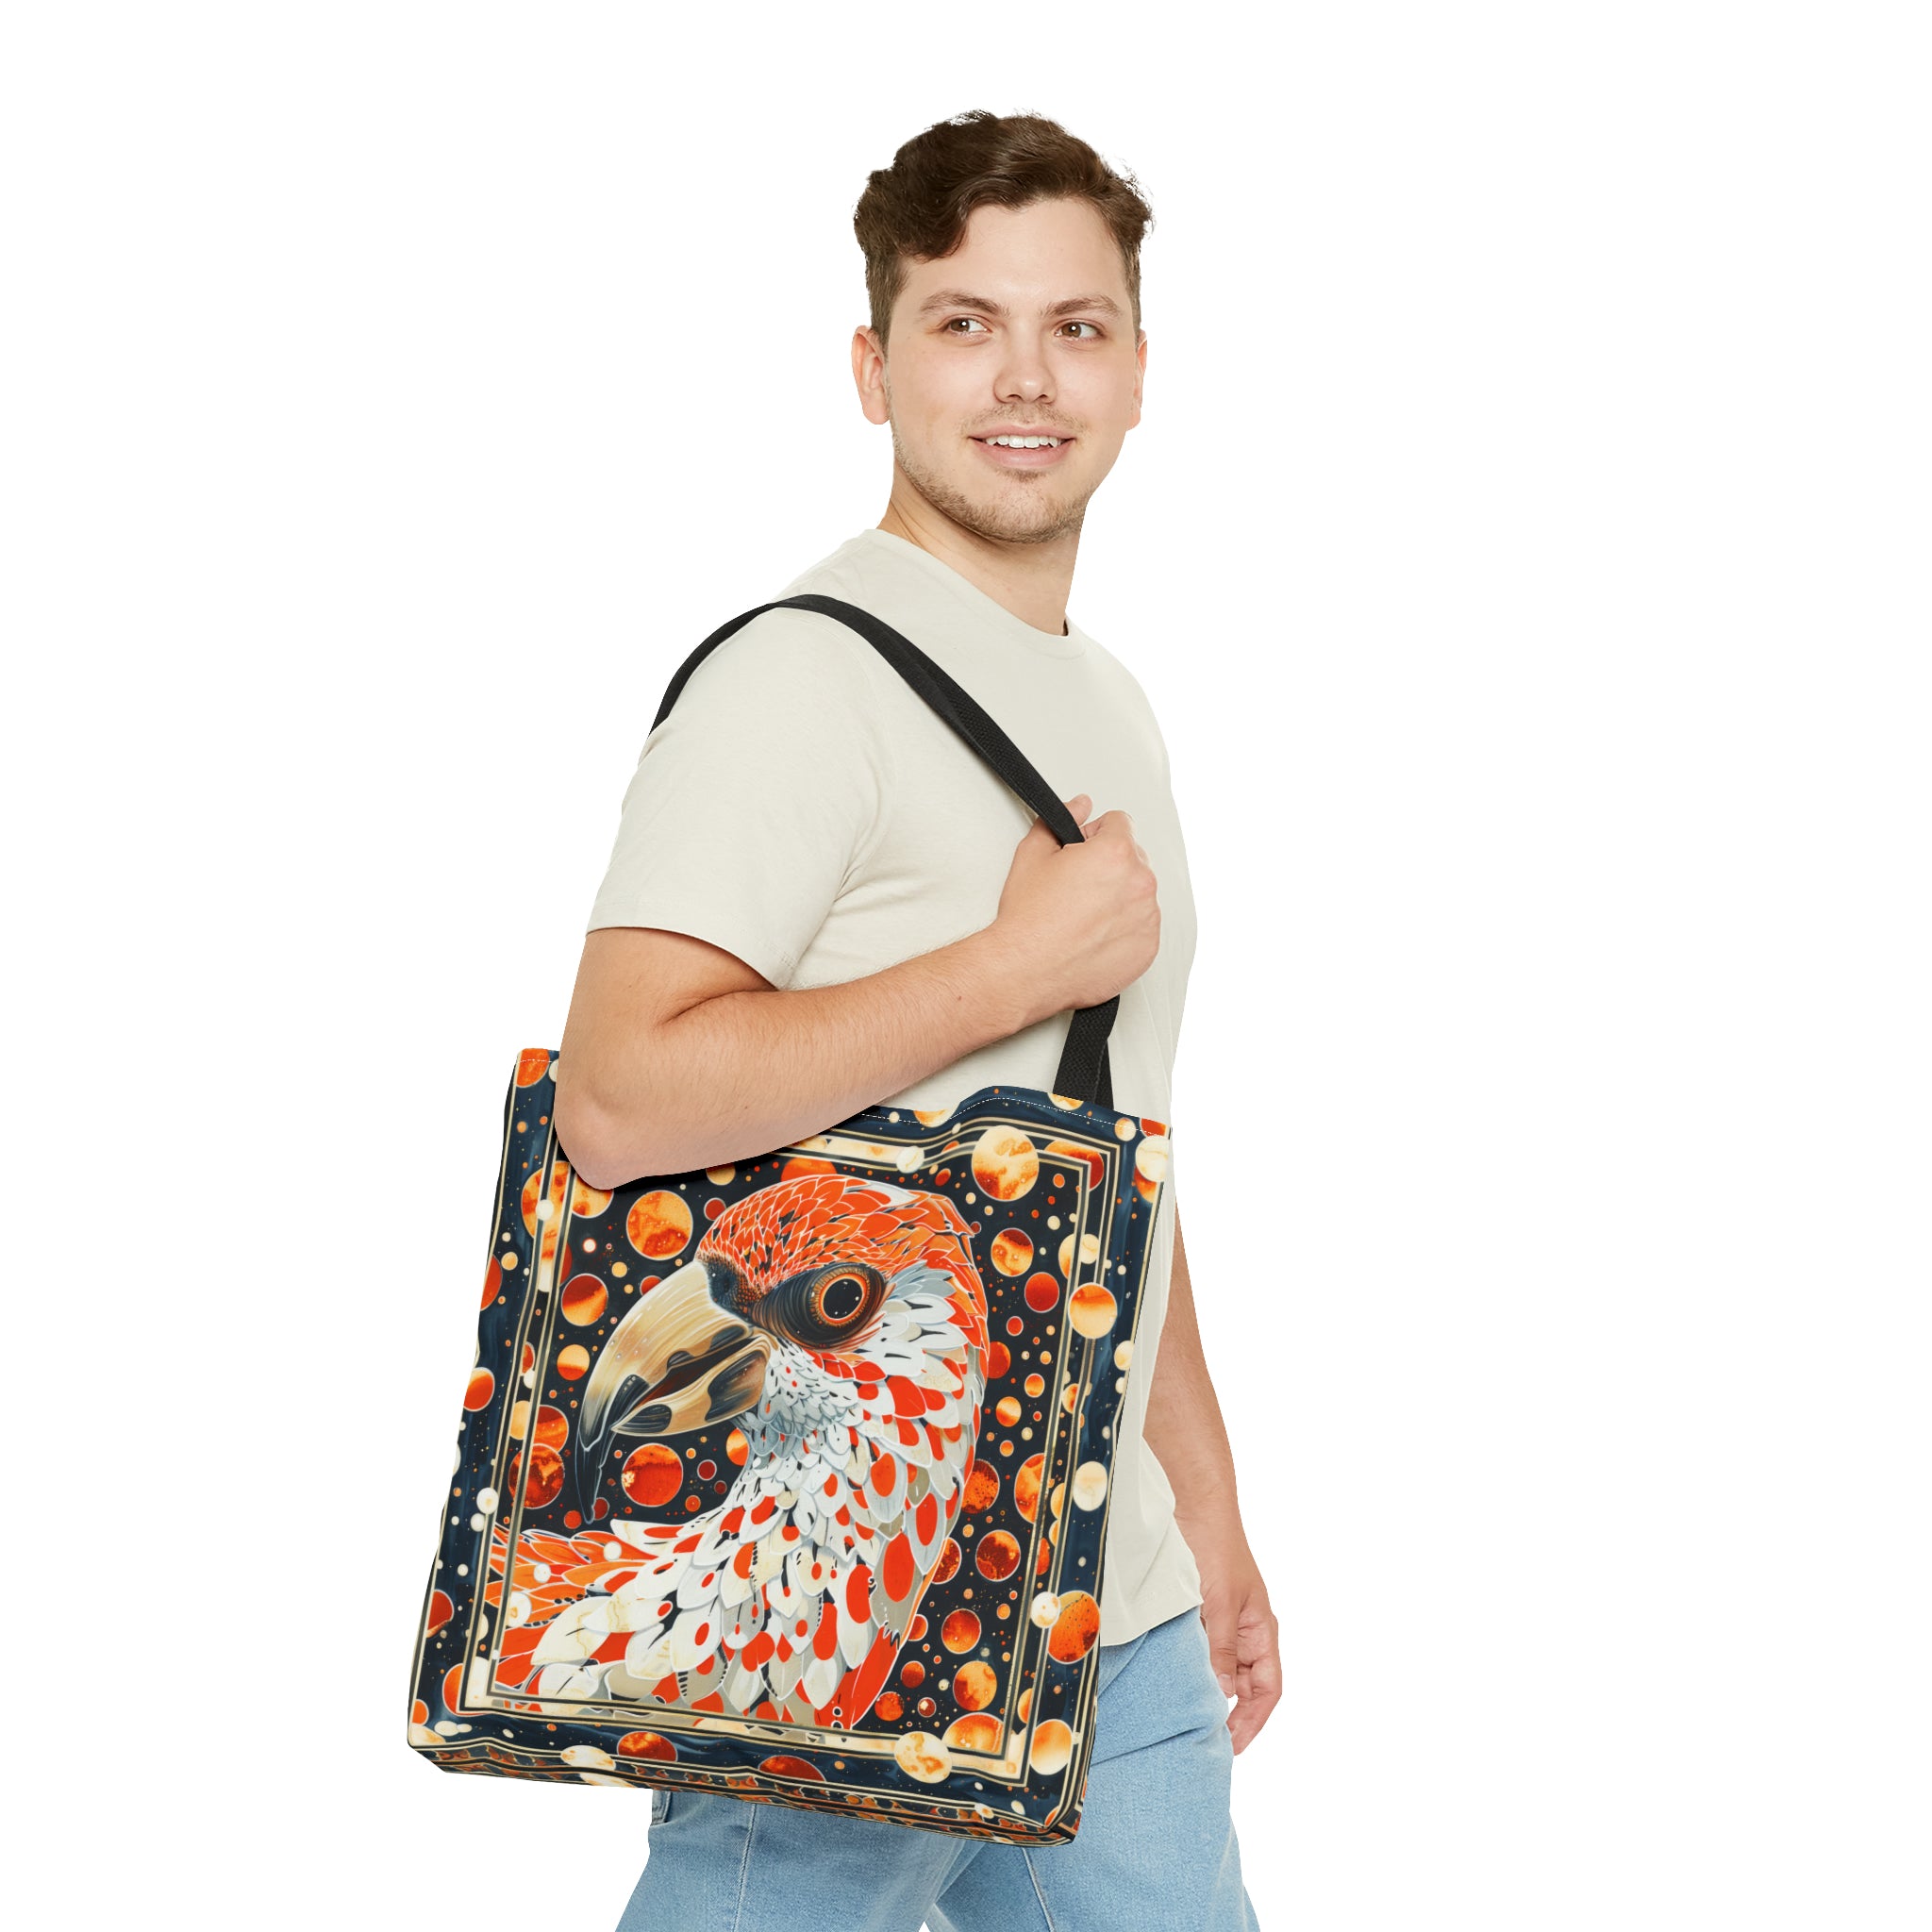 Canvas Tote Bag, vintage inspired orange bird design, vibrant artistic accessory, whimsical all over print bag in three sizes,